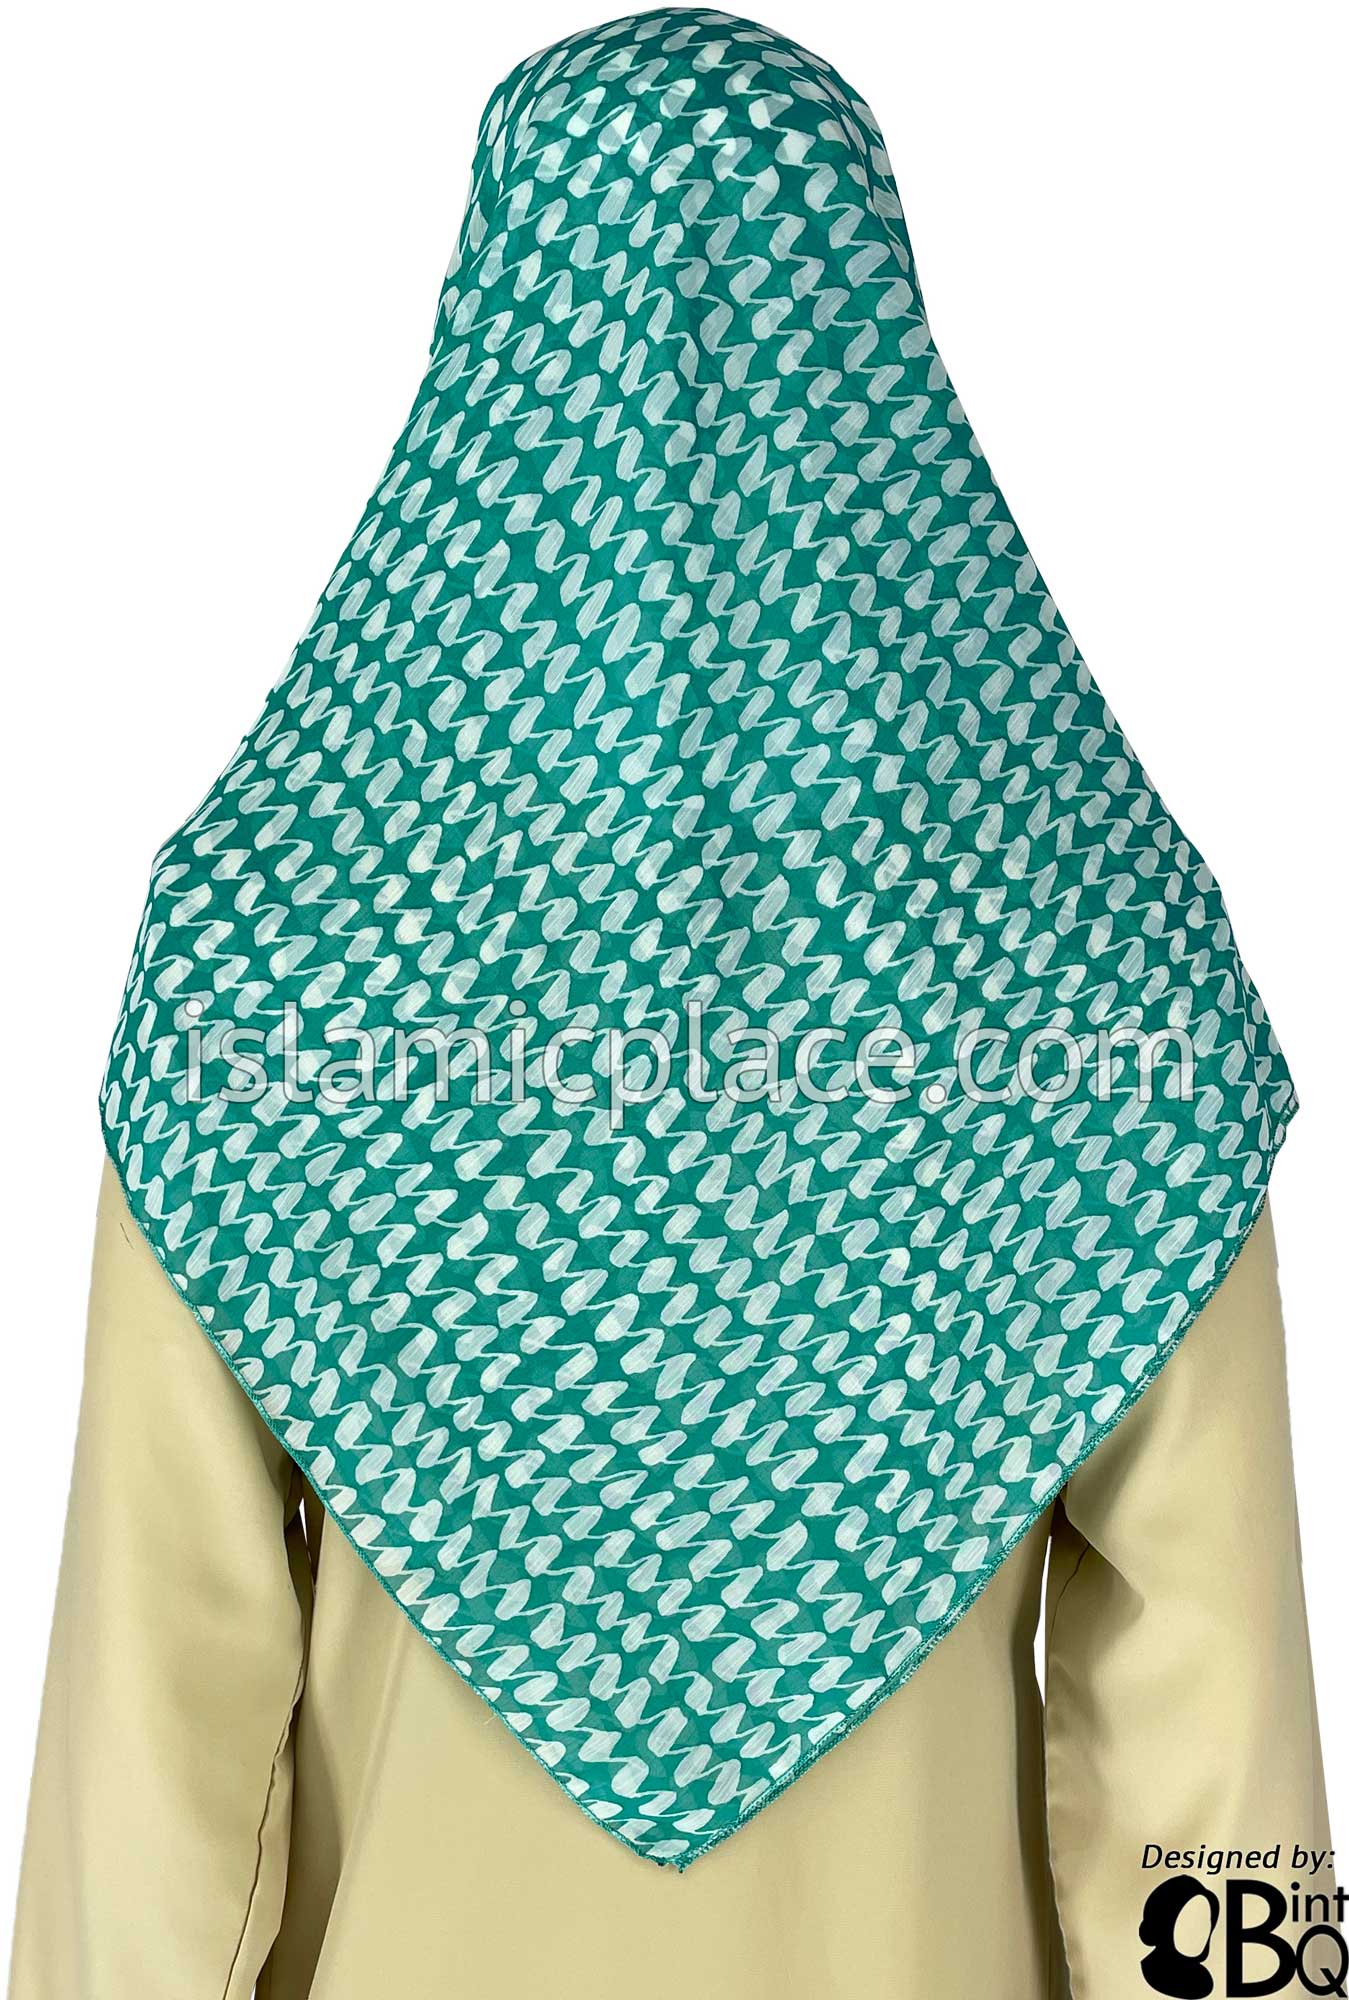 White Zig Zag Lines on Turquoise - 45" Square Printed Khimar